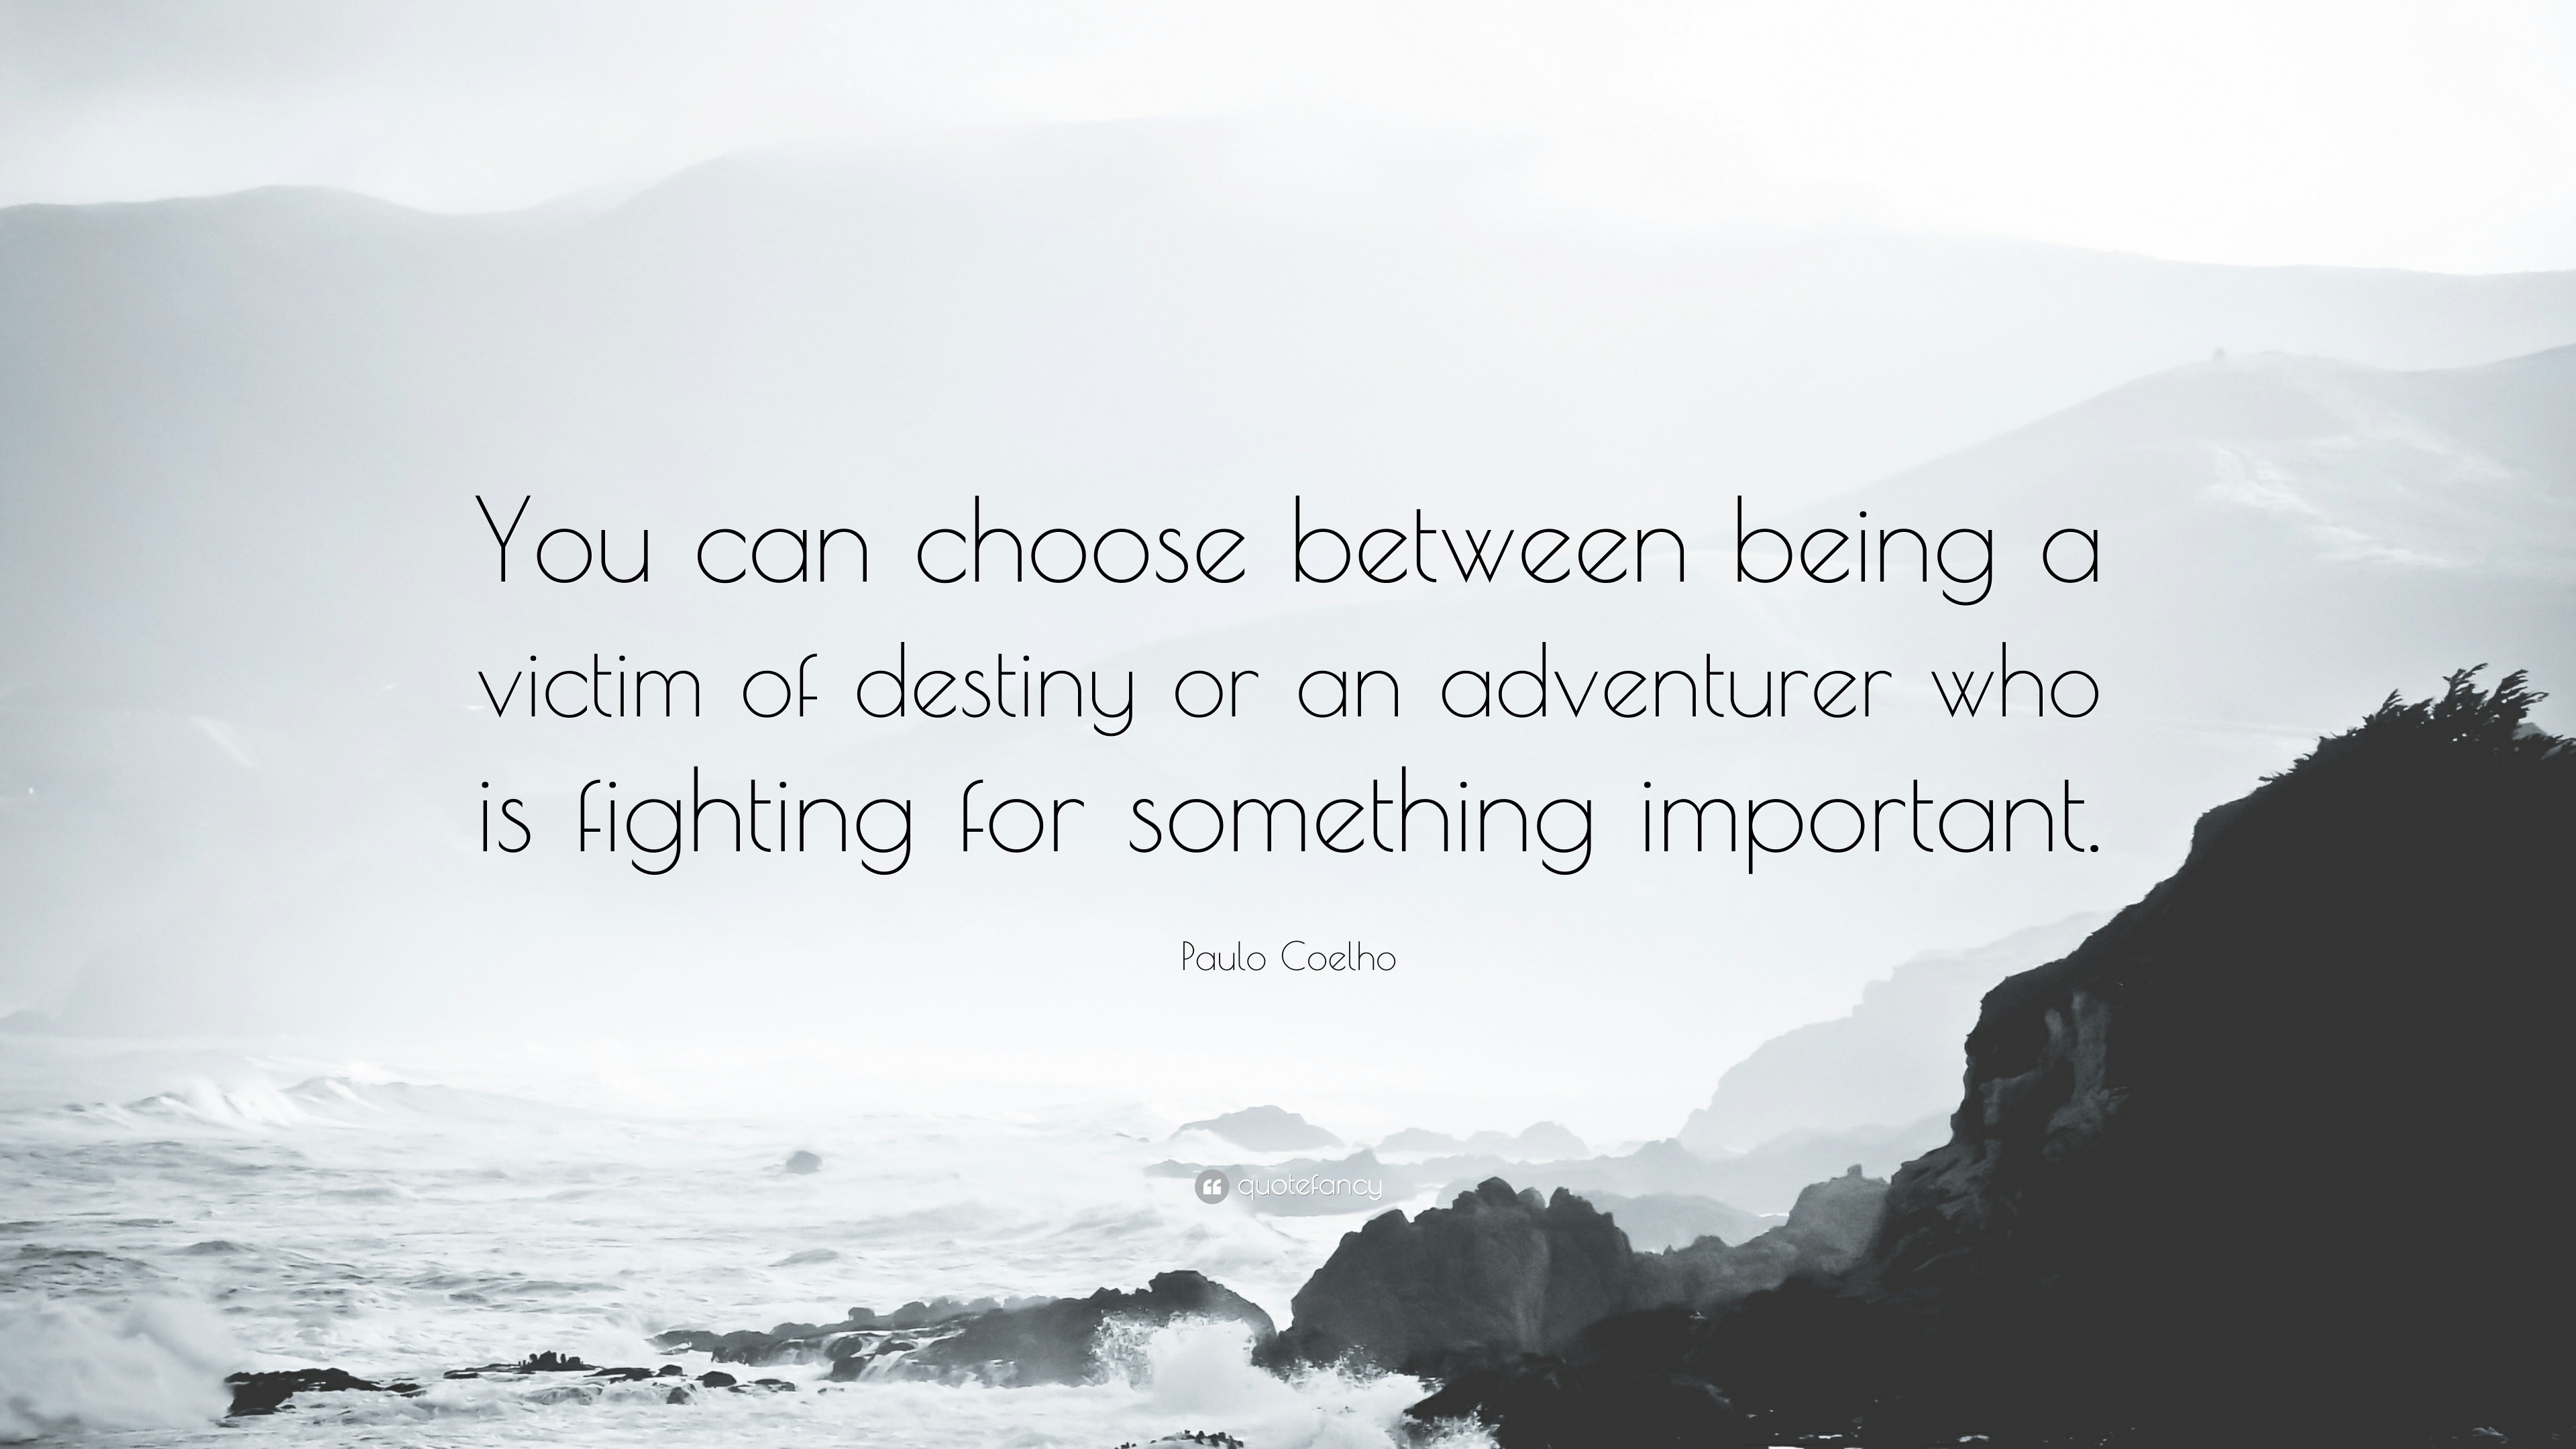 Paulo Coelho Quote: “You Can Choose Between Being A Victim Of Destiny Or An Adventurer Who